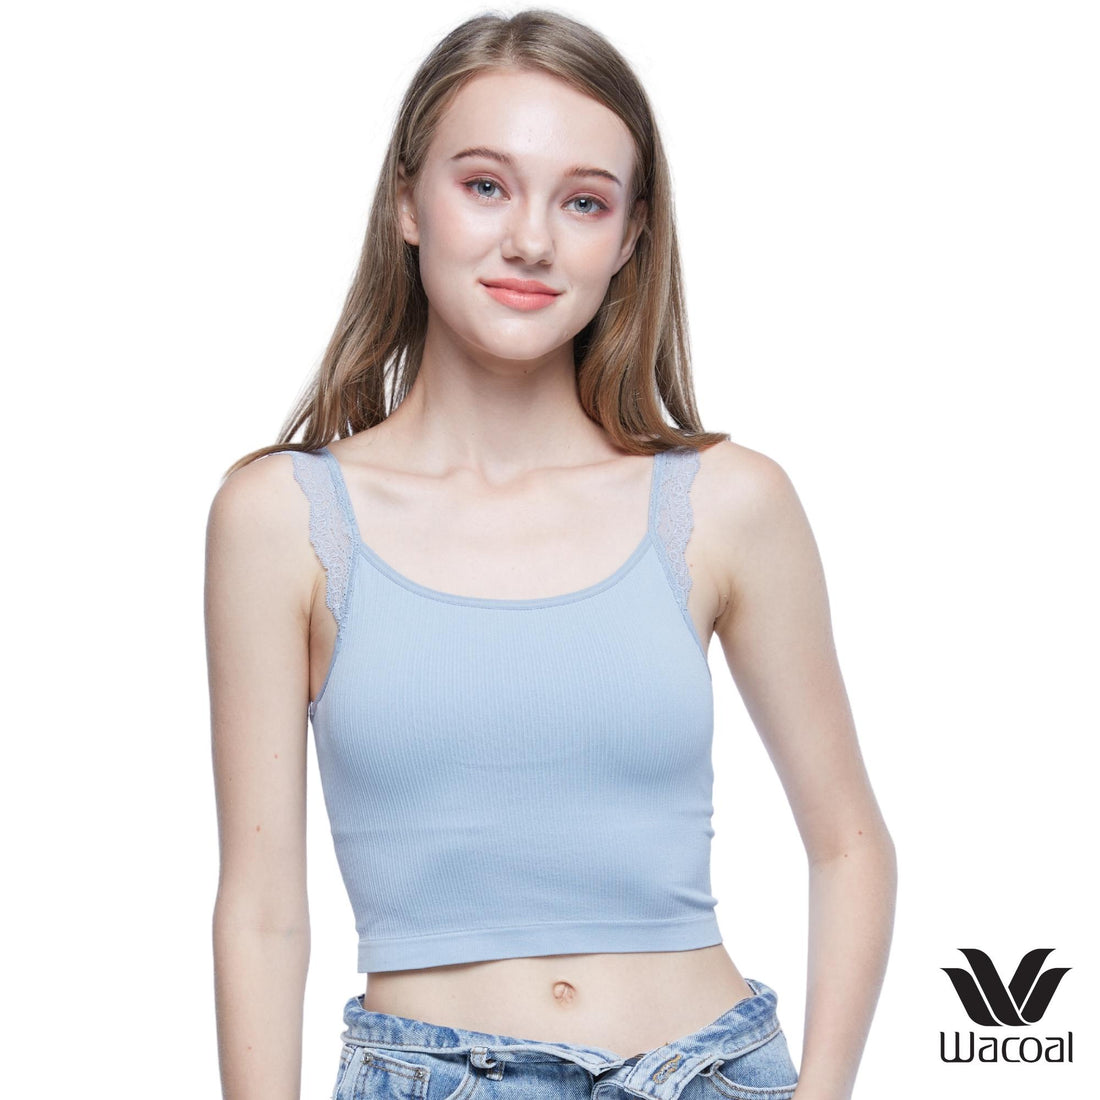 Wacoal Mood Comfy, backless camisole, built-in bra, decorated with lac –  Thai Wacoal Public Company Limited